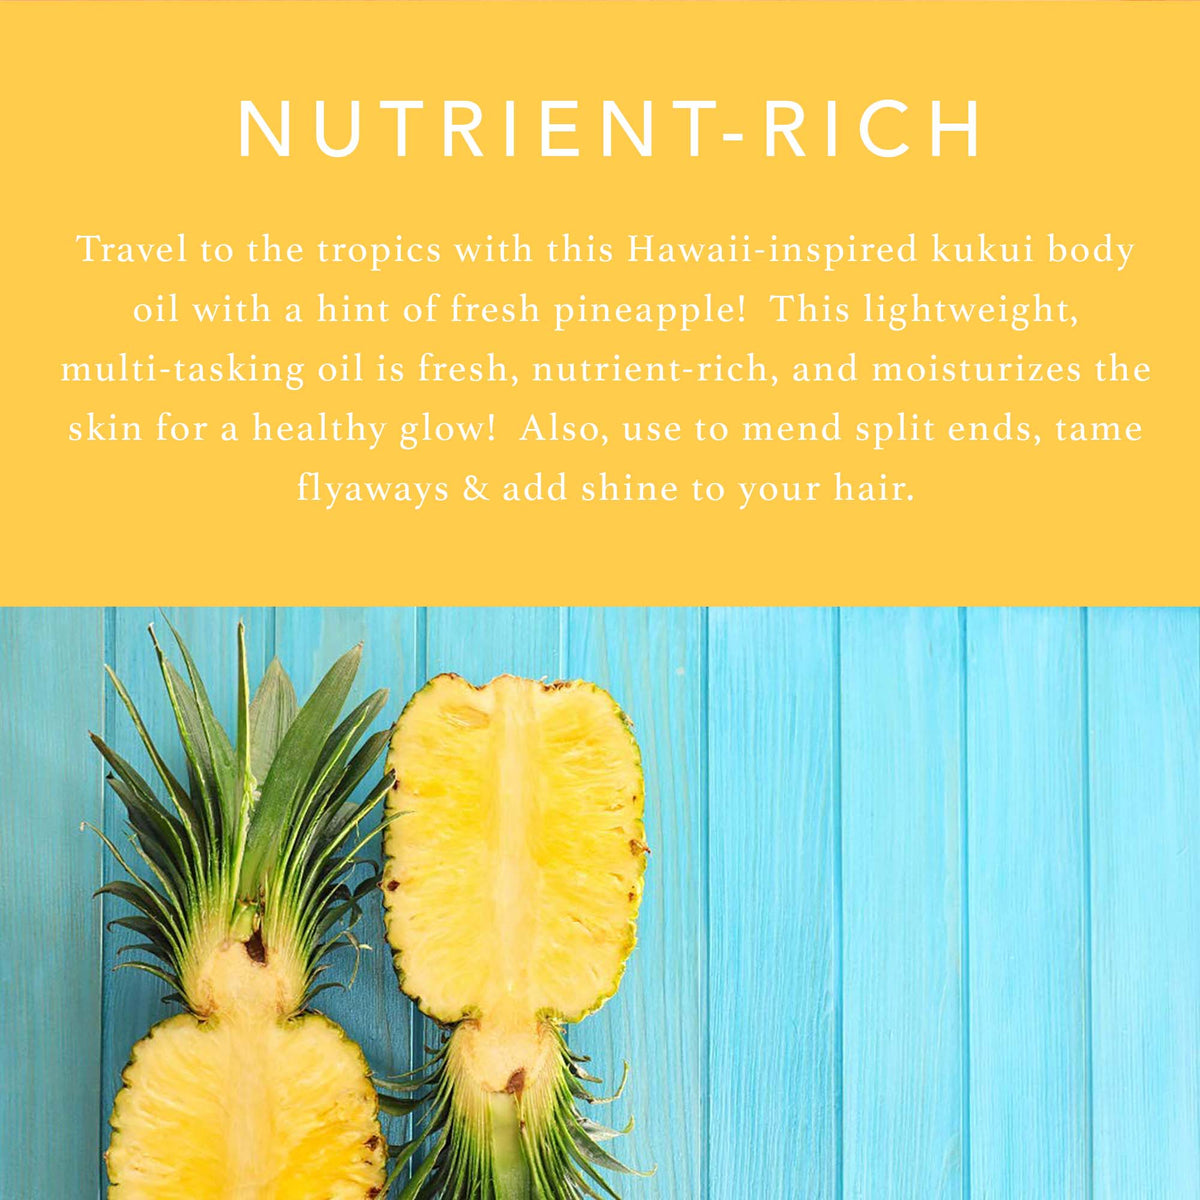 Travel to the tropics with this Hawaii-inspired kukui body oil with a hint of fresh pineapple!